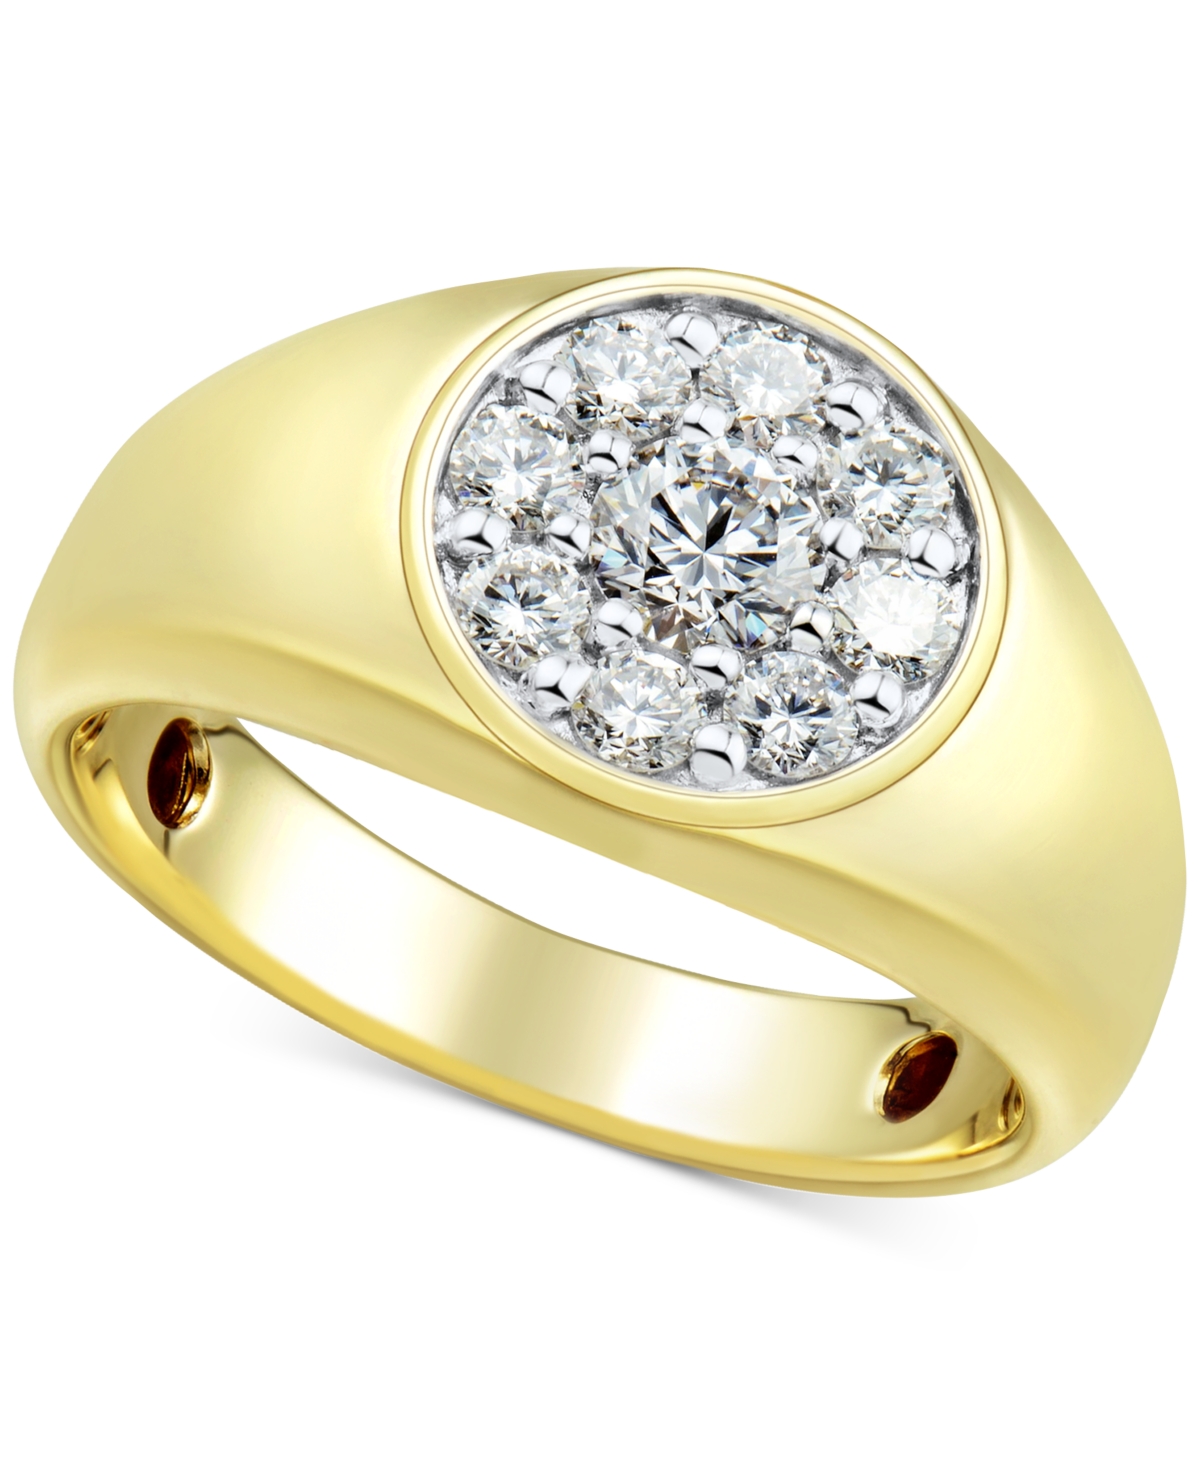 Men's Lab Grown Diamond Cluster Ring (1 ct. t.w.) in 10k Gold - Yellow Gold